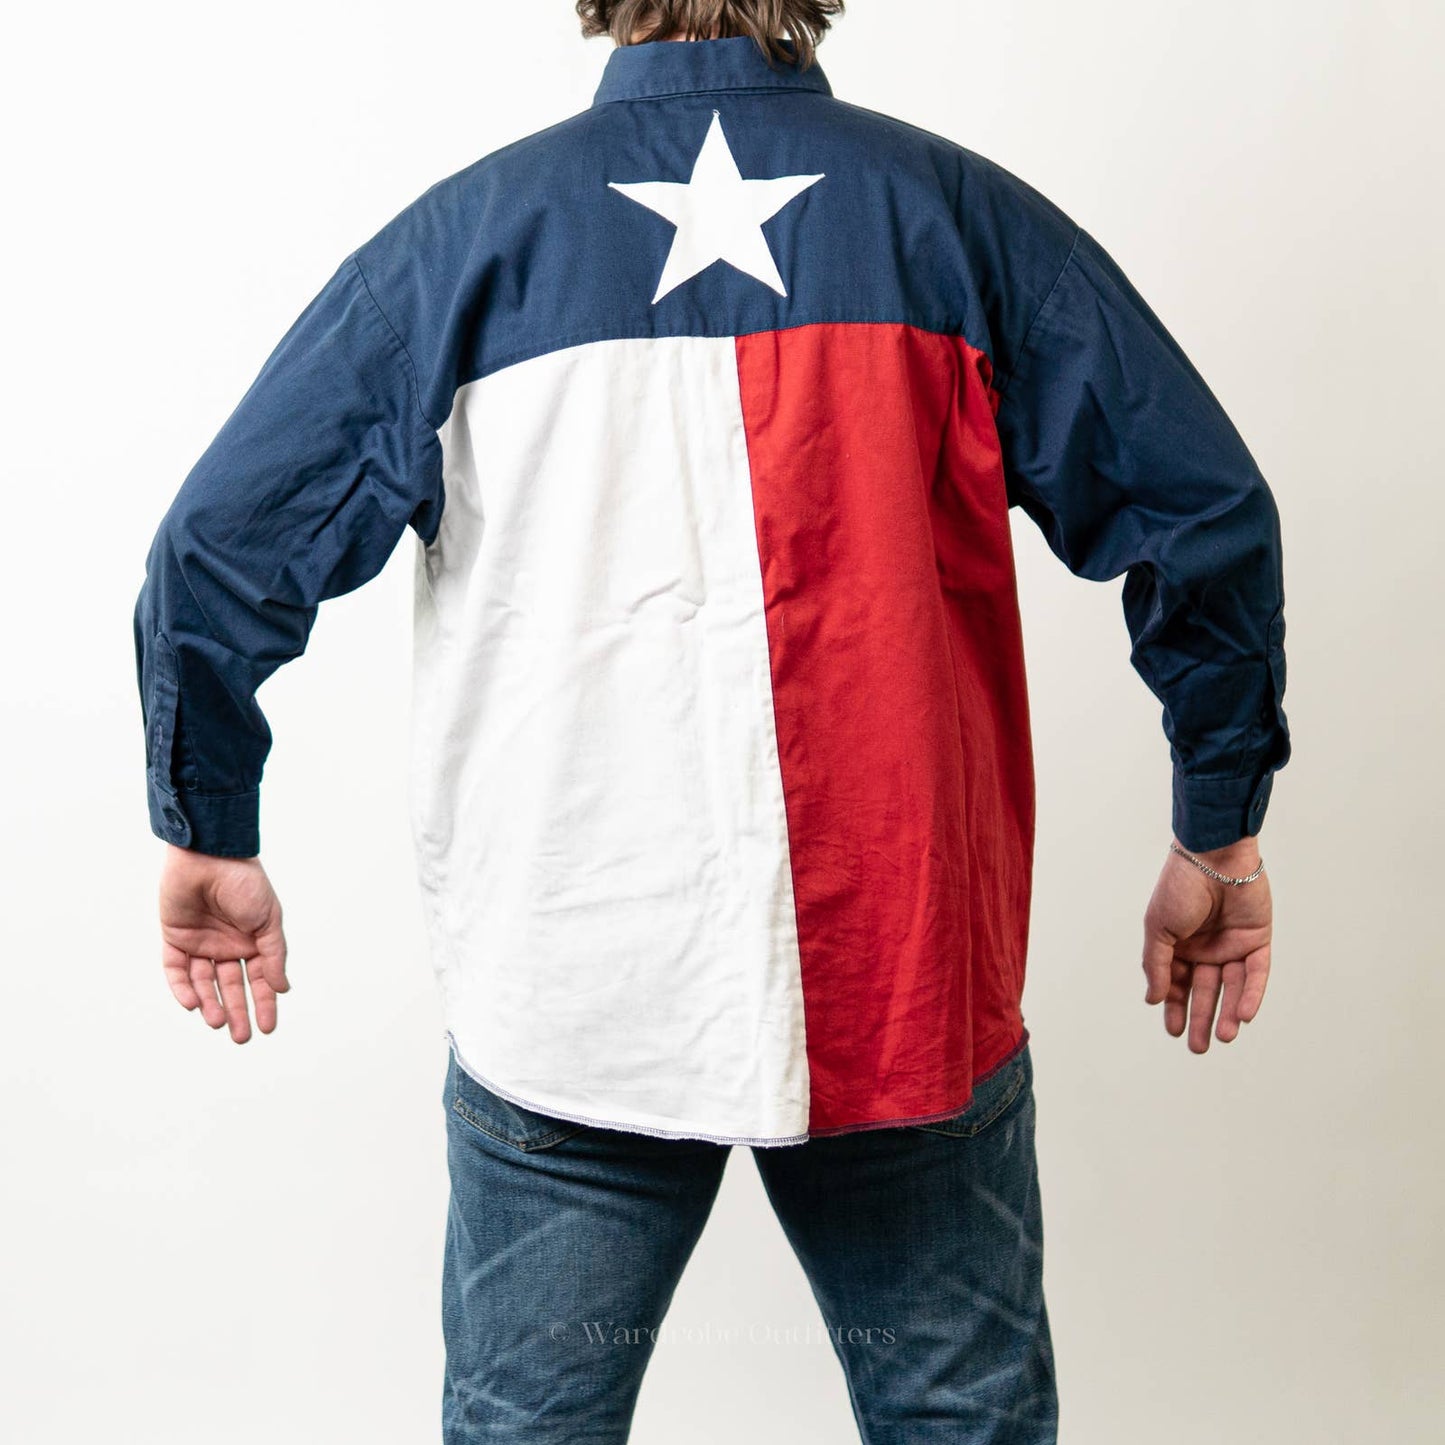 Vintage 90s Western TEXAS Flag Button Up by Panhandle Slim